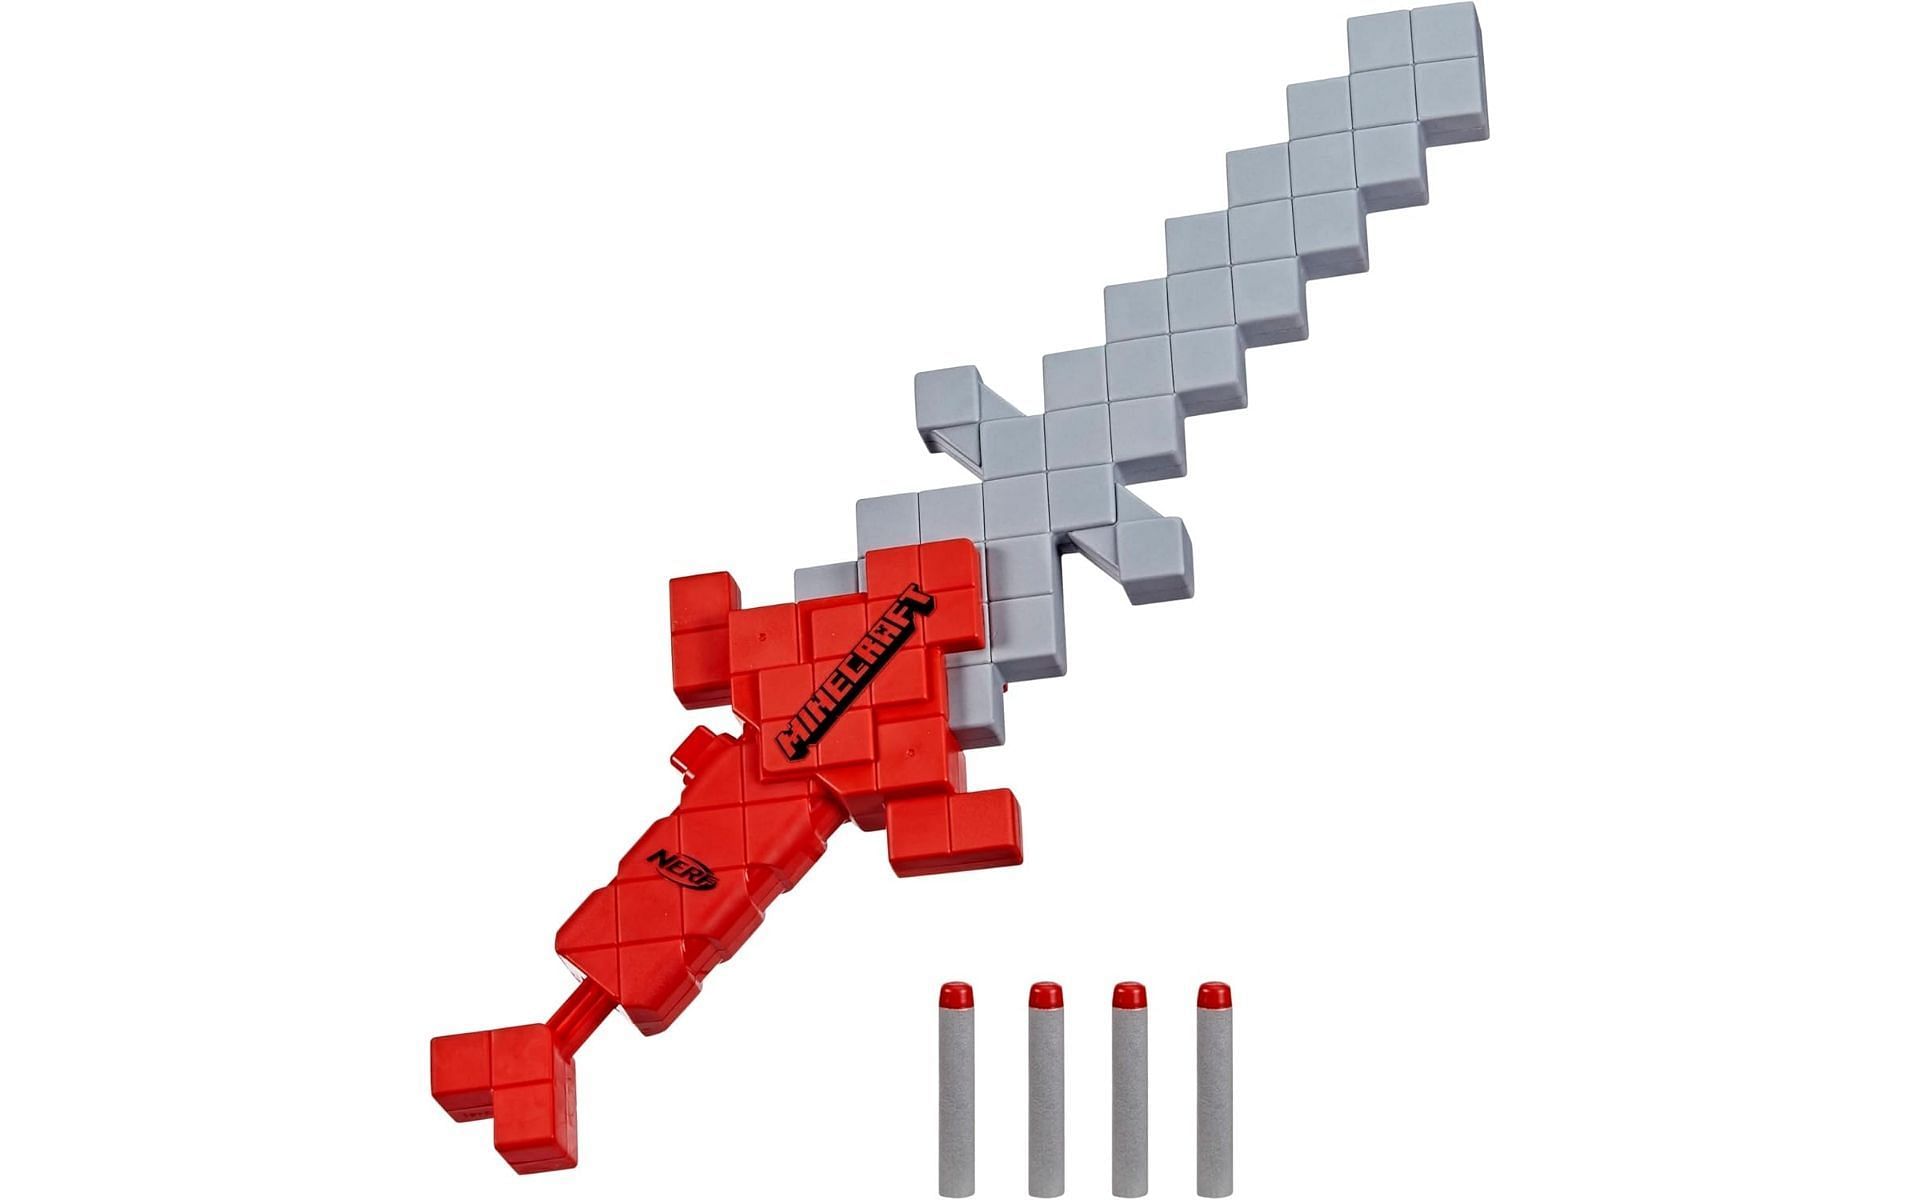 Fans can strike down their foes with this Nerf sword (Image via Amazon)